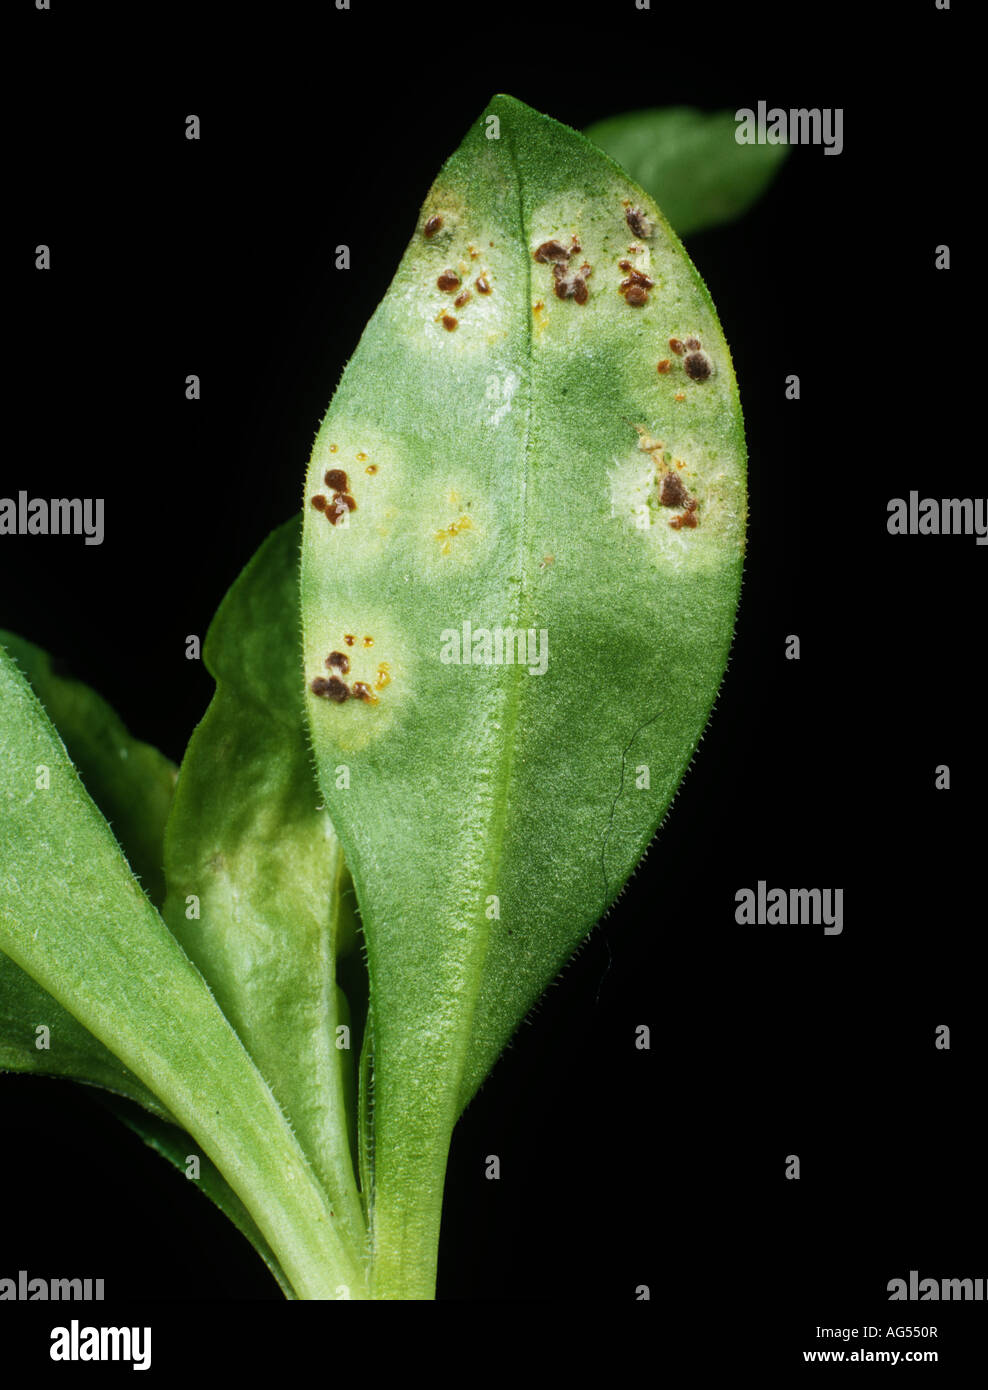 Rust Puccinia arenariae pustules on the underside of a sweet william leaf Stock Photo